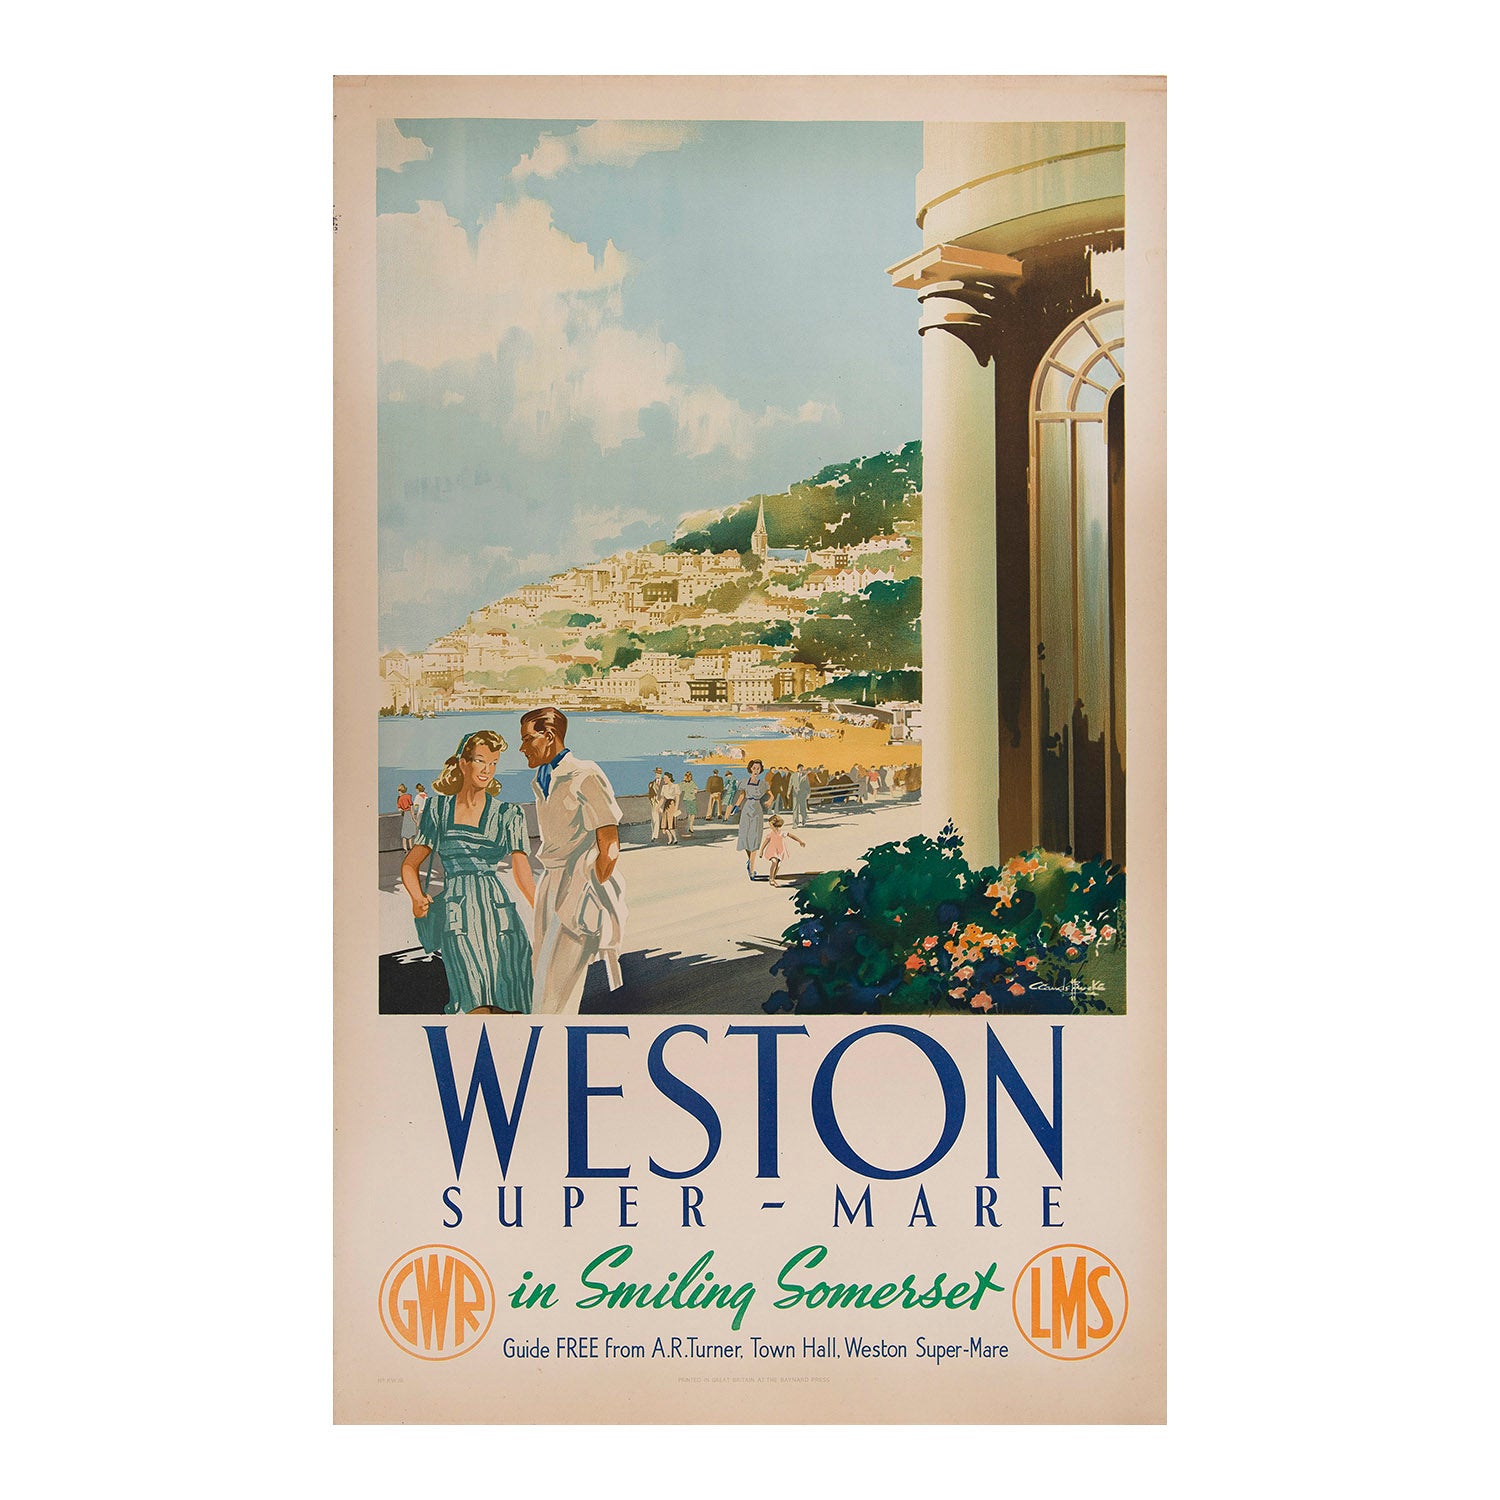 Weston Super-Mare in Smiling Somerset, painted by the noted British poster artist Claude Buckle, 1946. The poster was jointly published by the Great Western Railway and the London Midland &amp; Scottish Railway. It depicts a smartly dressed couple outside the Winter Gardens Pavilion, with the bay and town in the middle distance